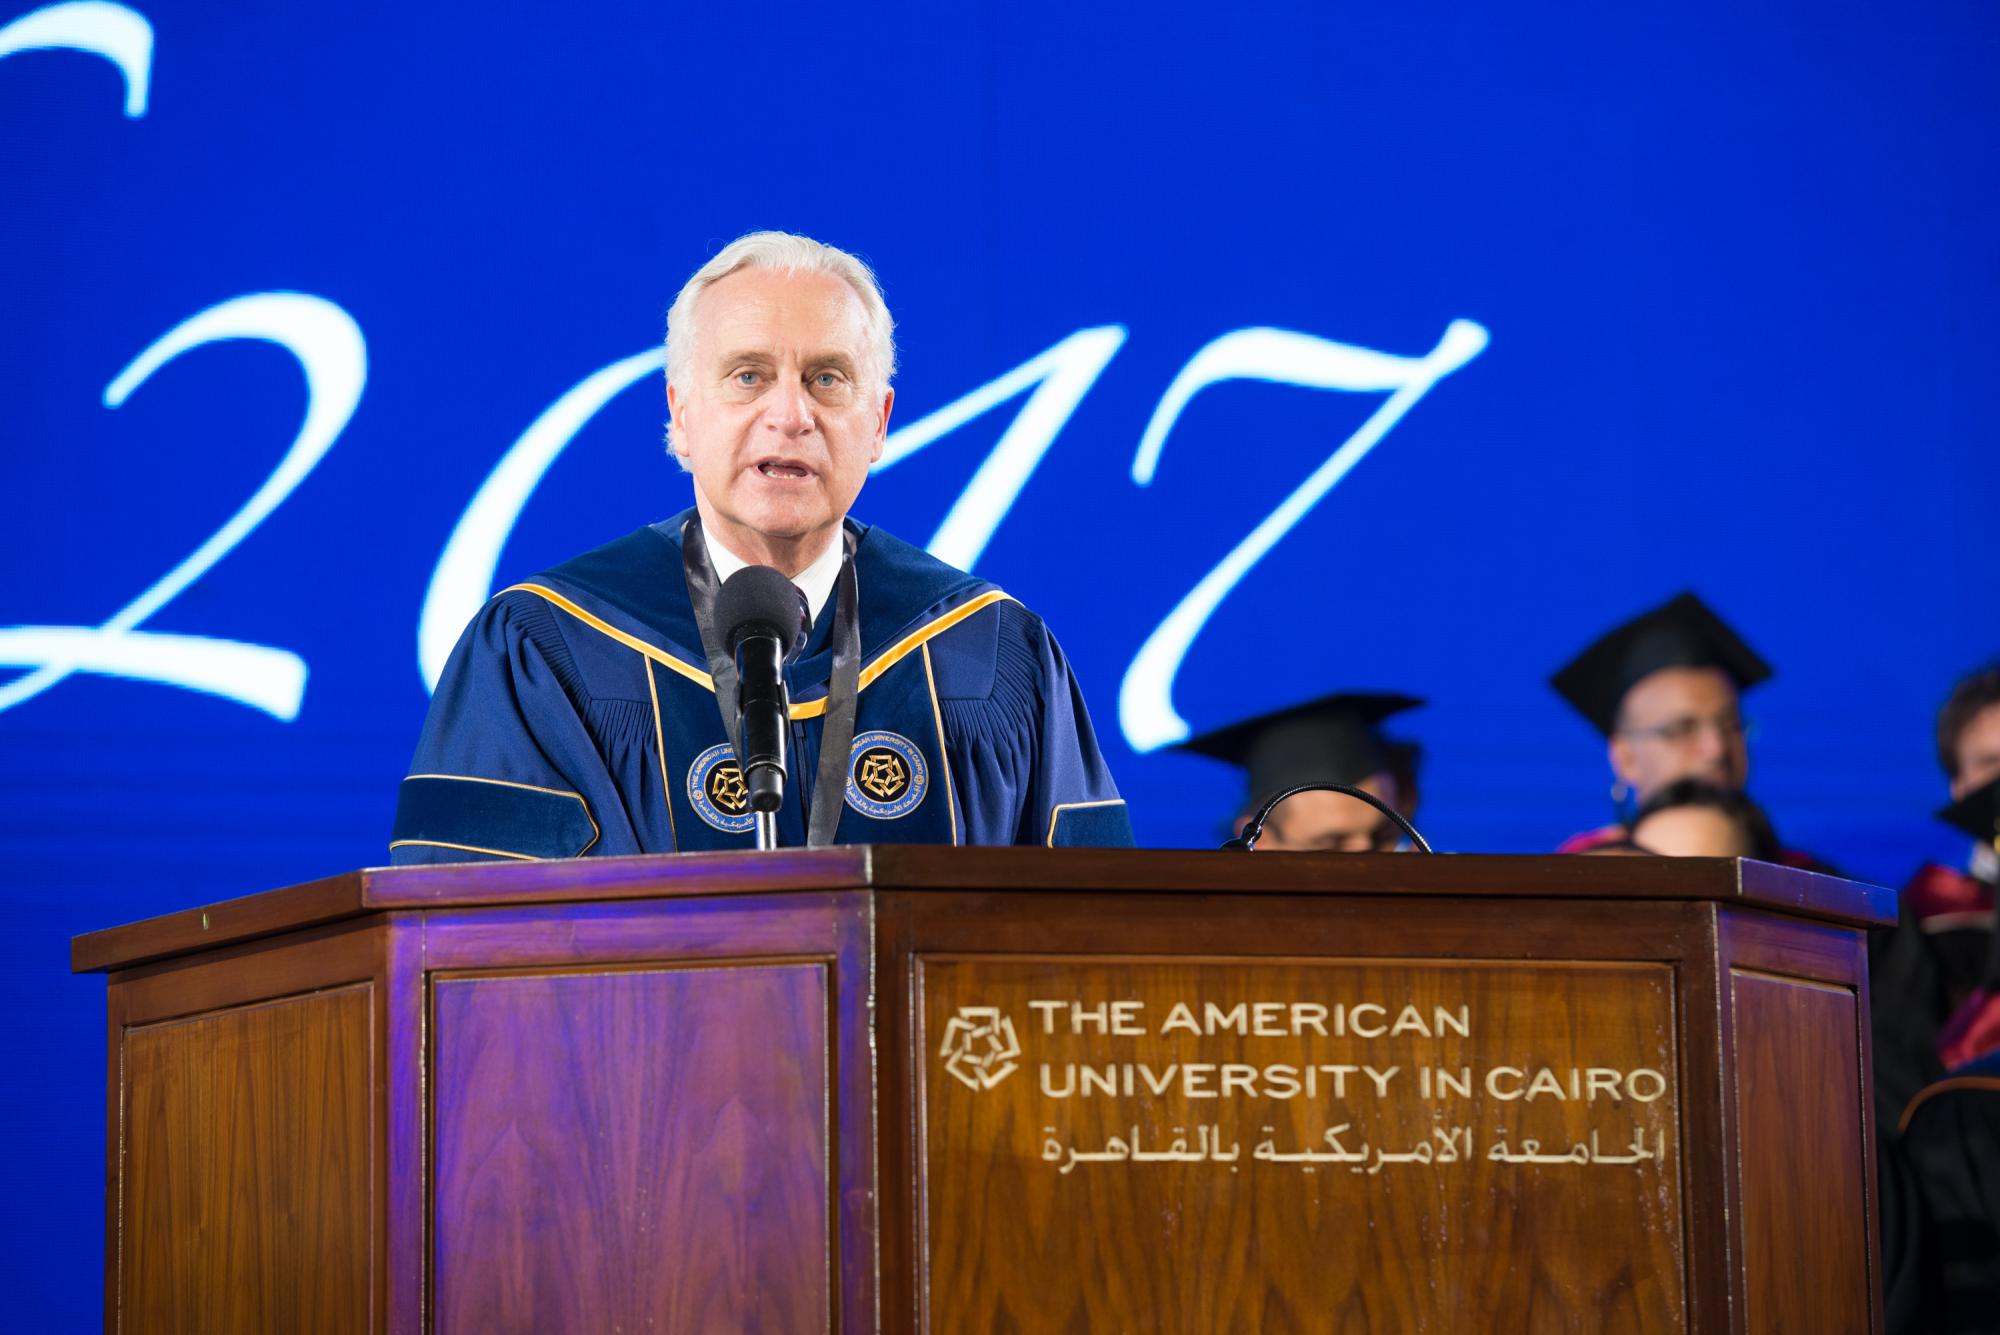 President Francis J. Ricciardone: "We have so much to celebrate today, many people to honor, not least our graduates”